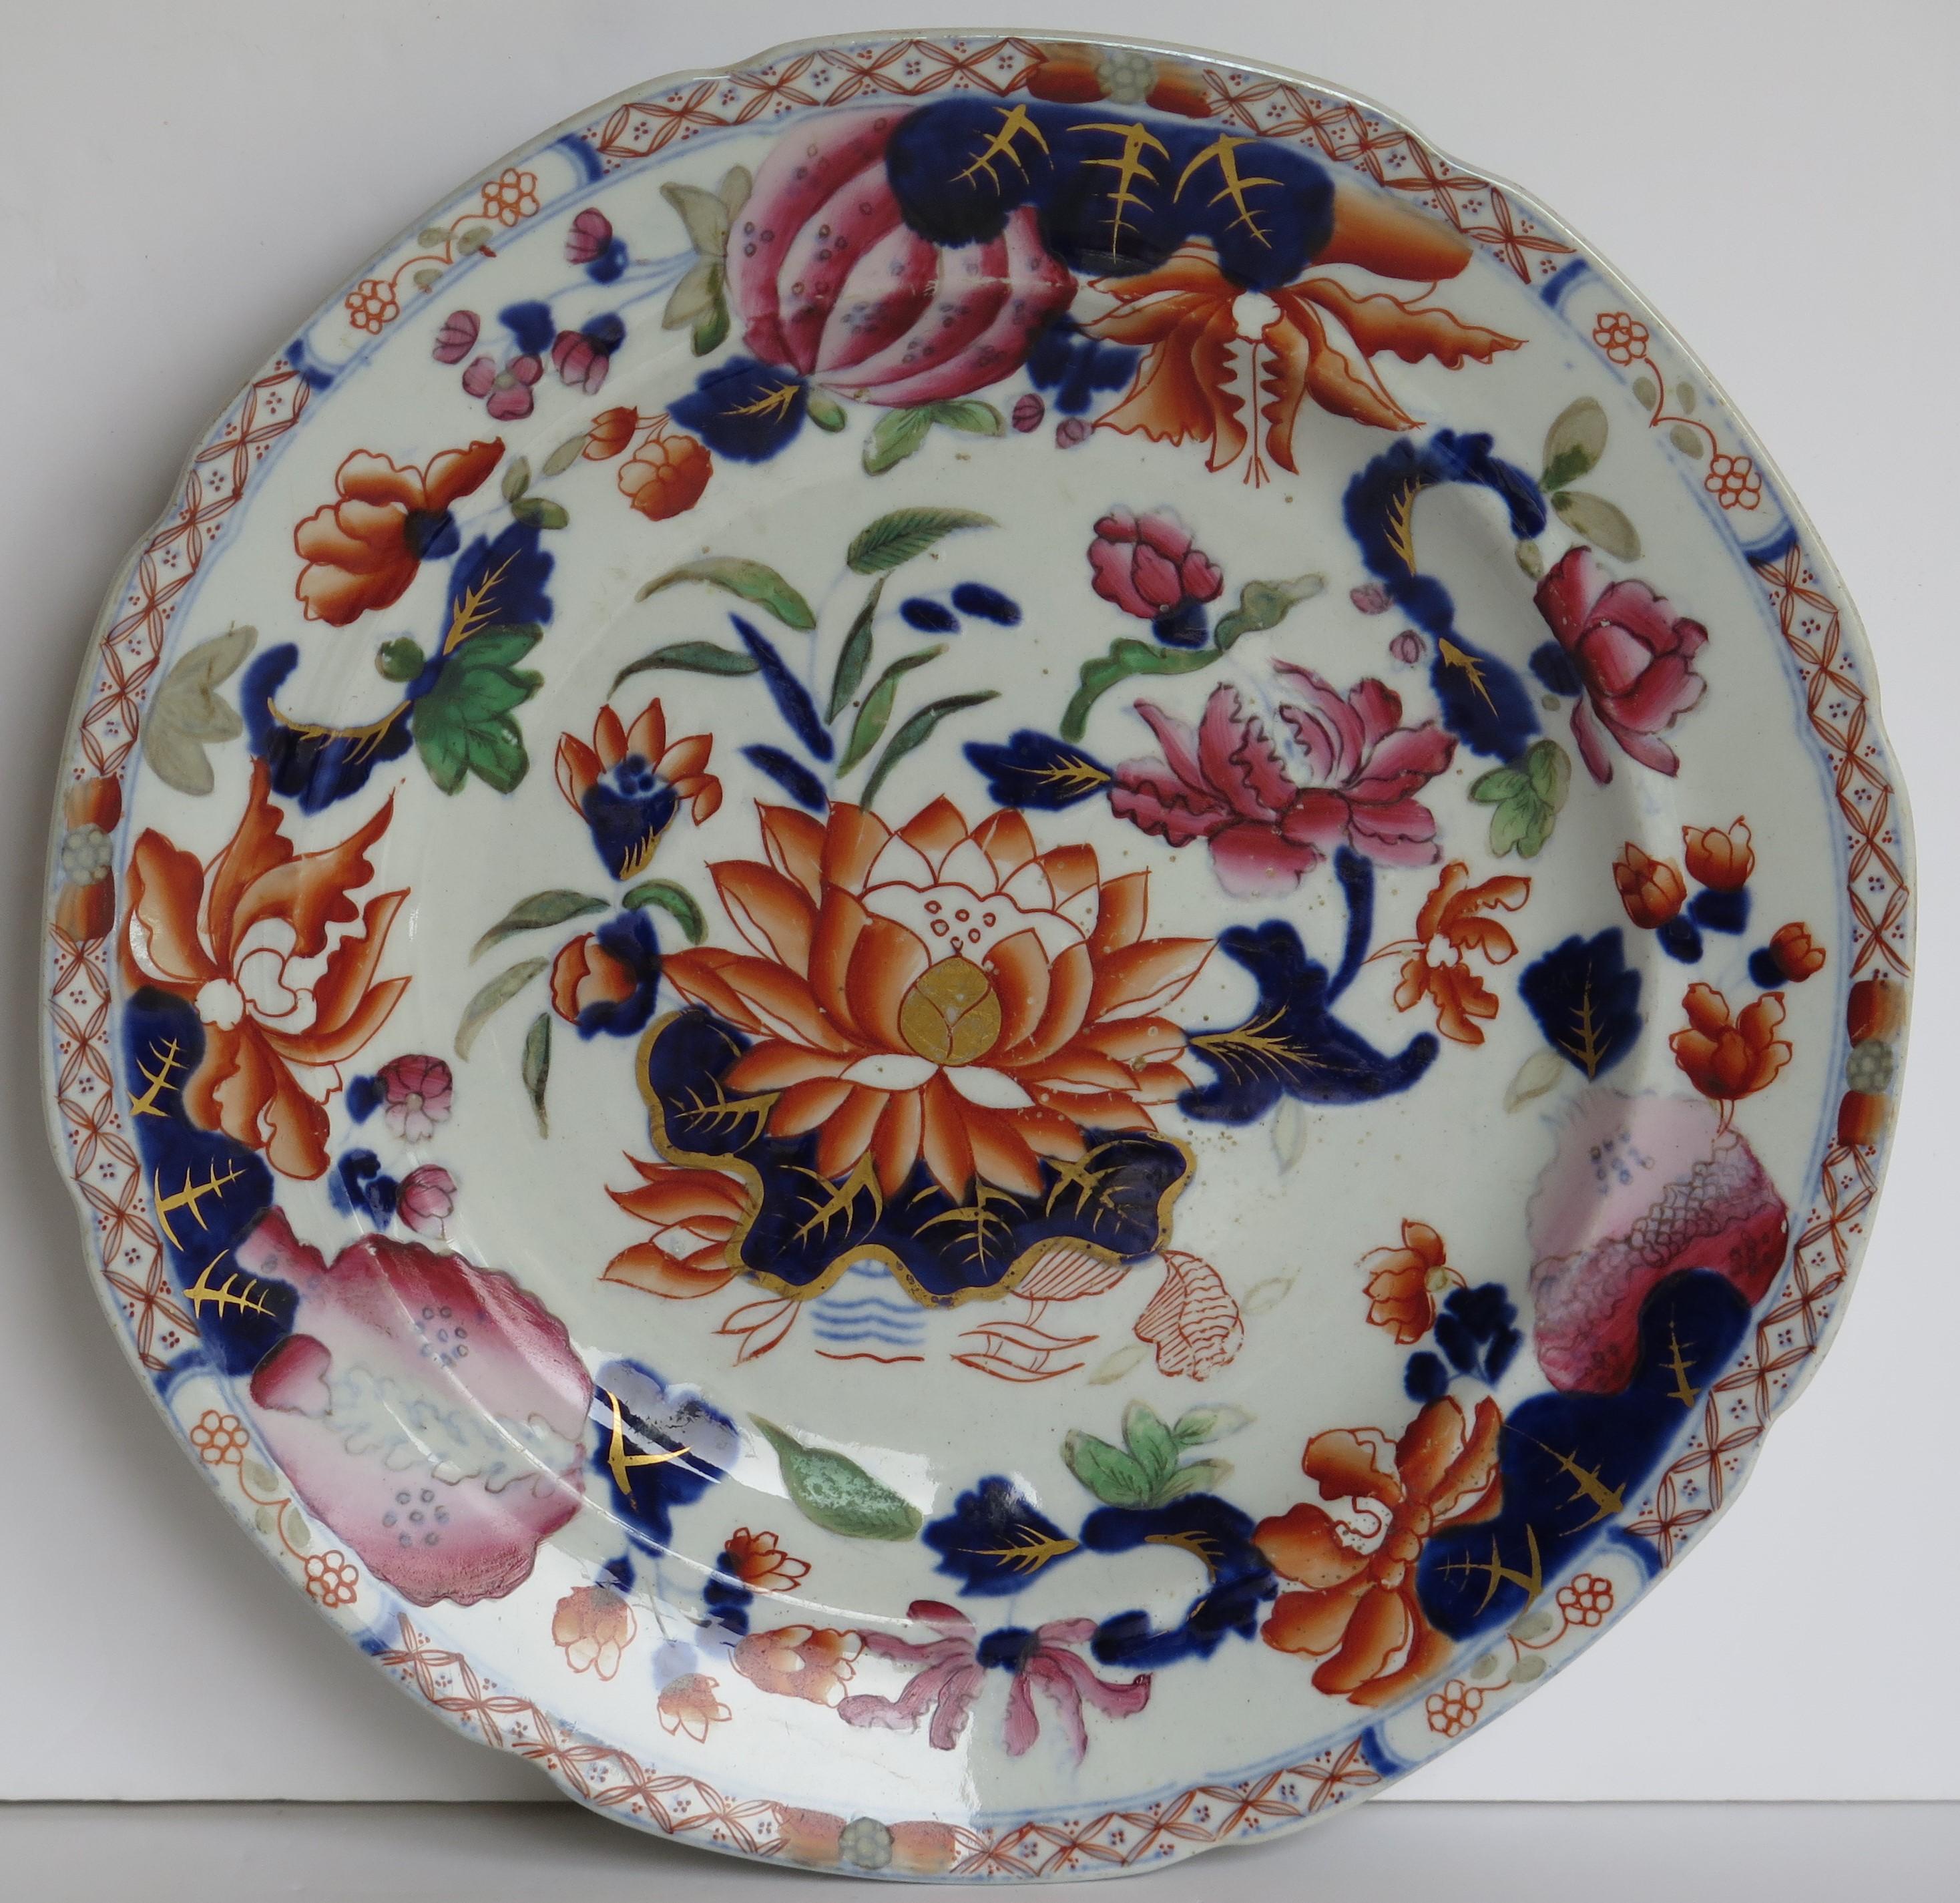 This is a very good Plate in the water lily pattern, made by Hicks and Meigh of Shelton, Staffordshire, England between 1812 and 1822, probably circa 1815.

This is a beautiful plate with a shaped notched edge to the rim.

The plate has been